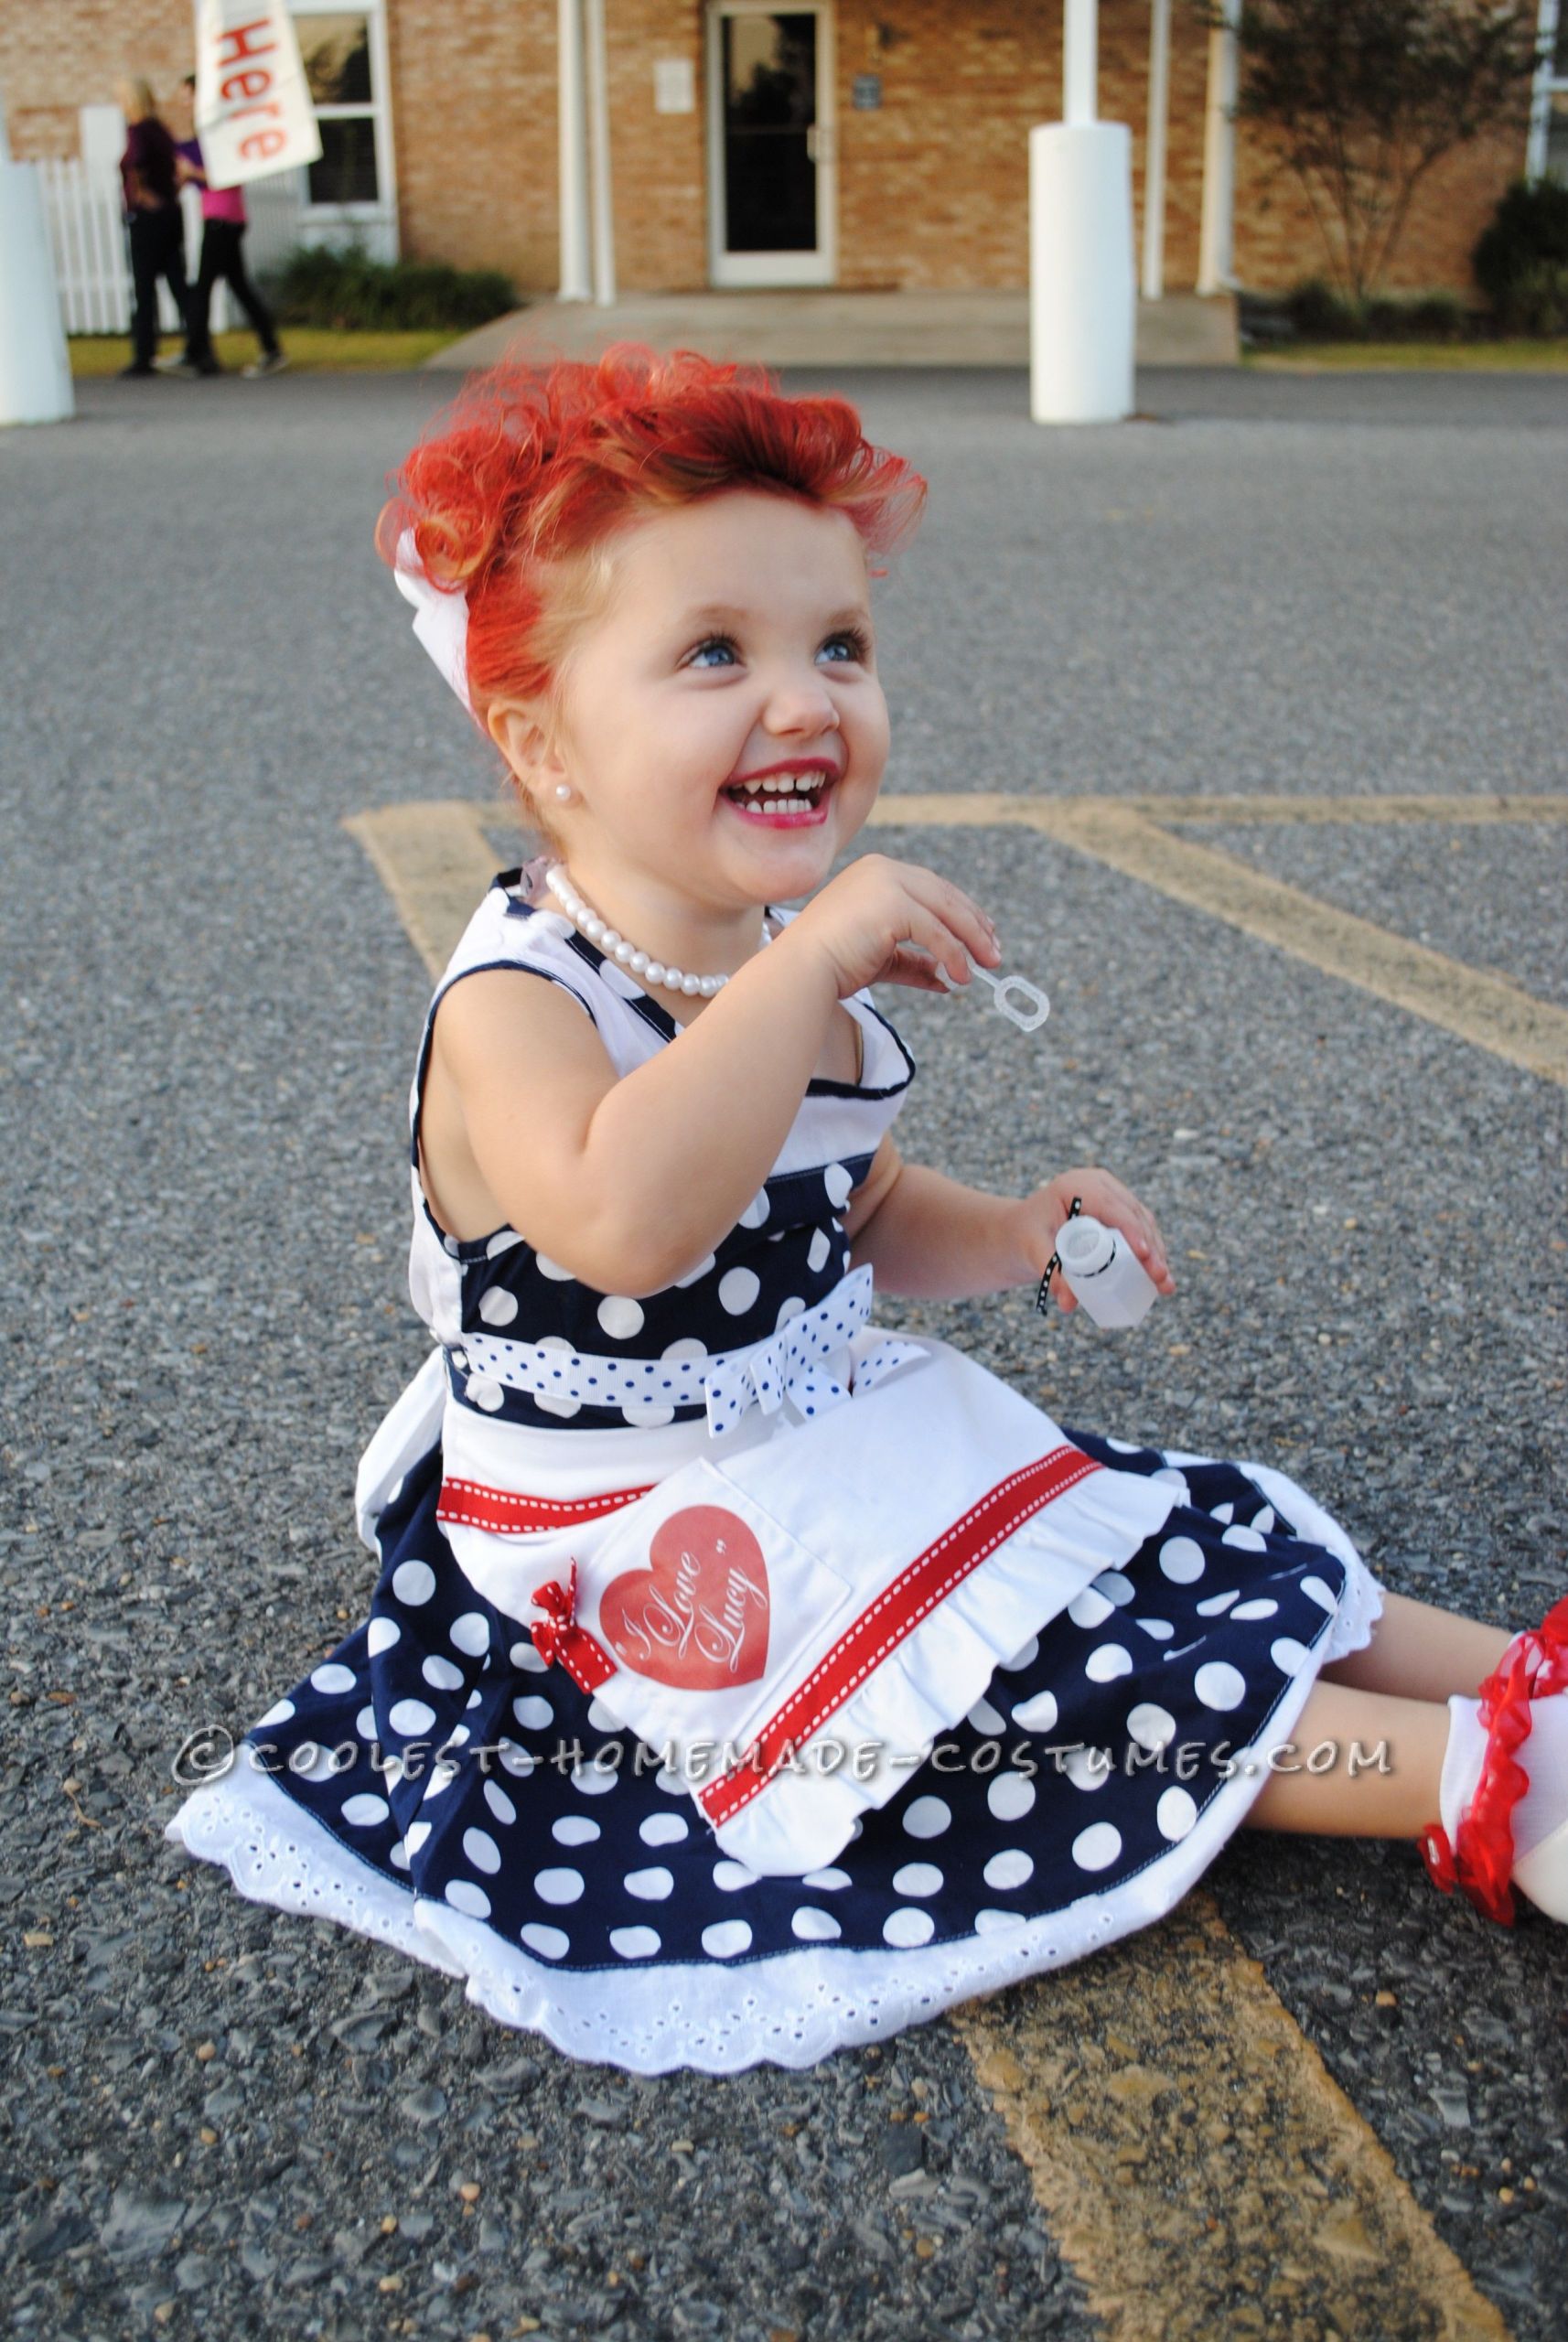 DIY Baby Halloween Costumes
 Adorable “I Love Lucy” Homemade Costume for a Toddler